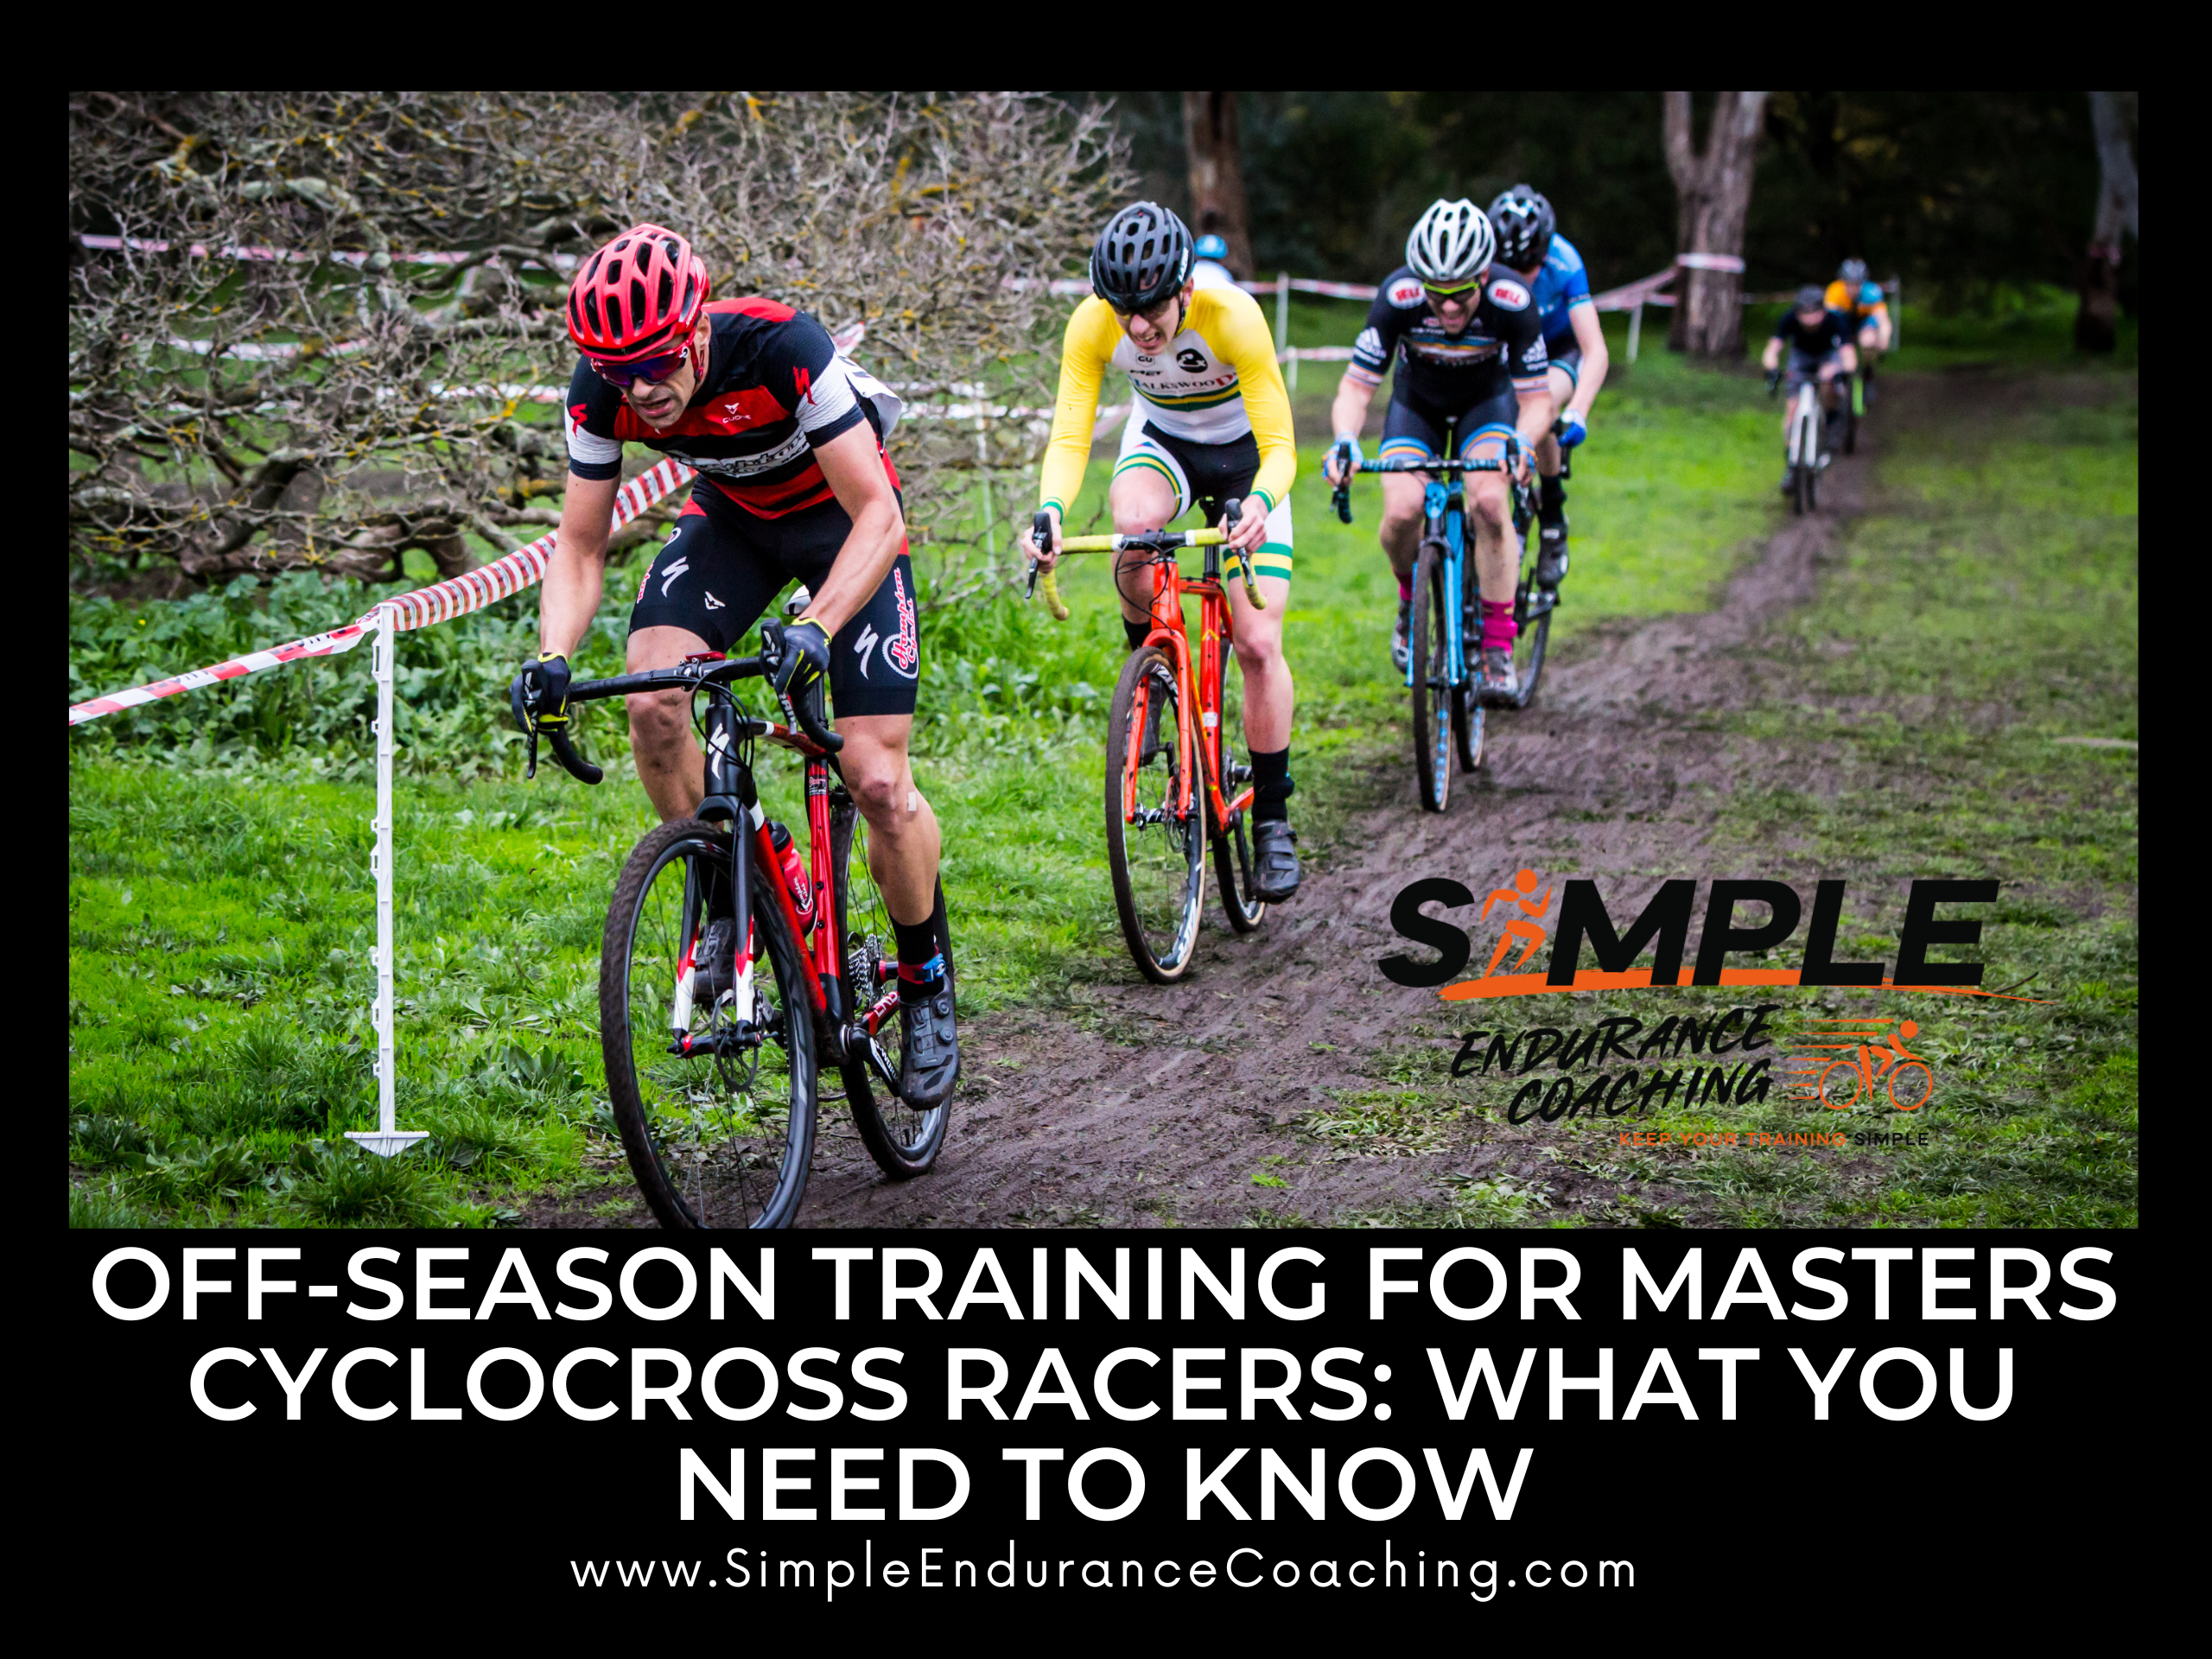 Off-season training for masters cyclocross racers is the best time to make significant gains for cyclocross, but many cyclists over 50 struggle with maintaining a consistent training load. Here are some tips.